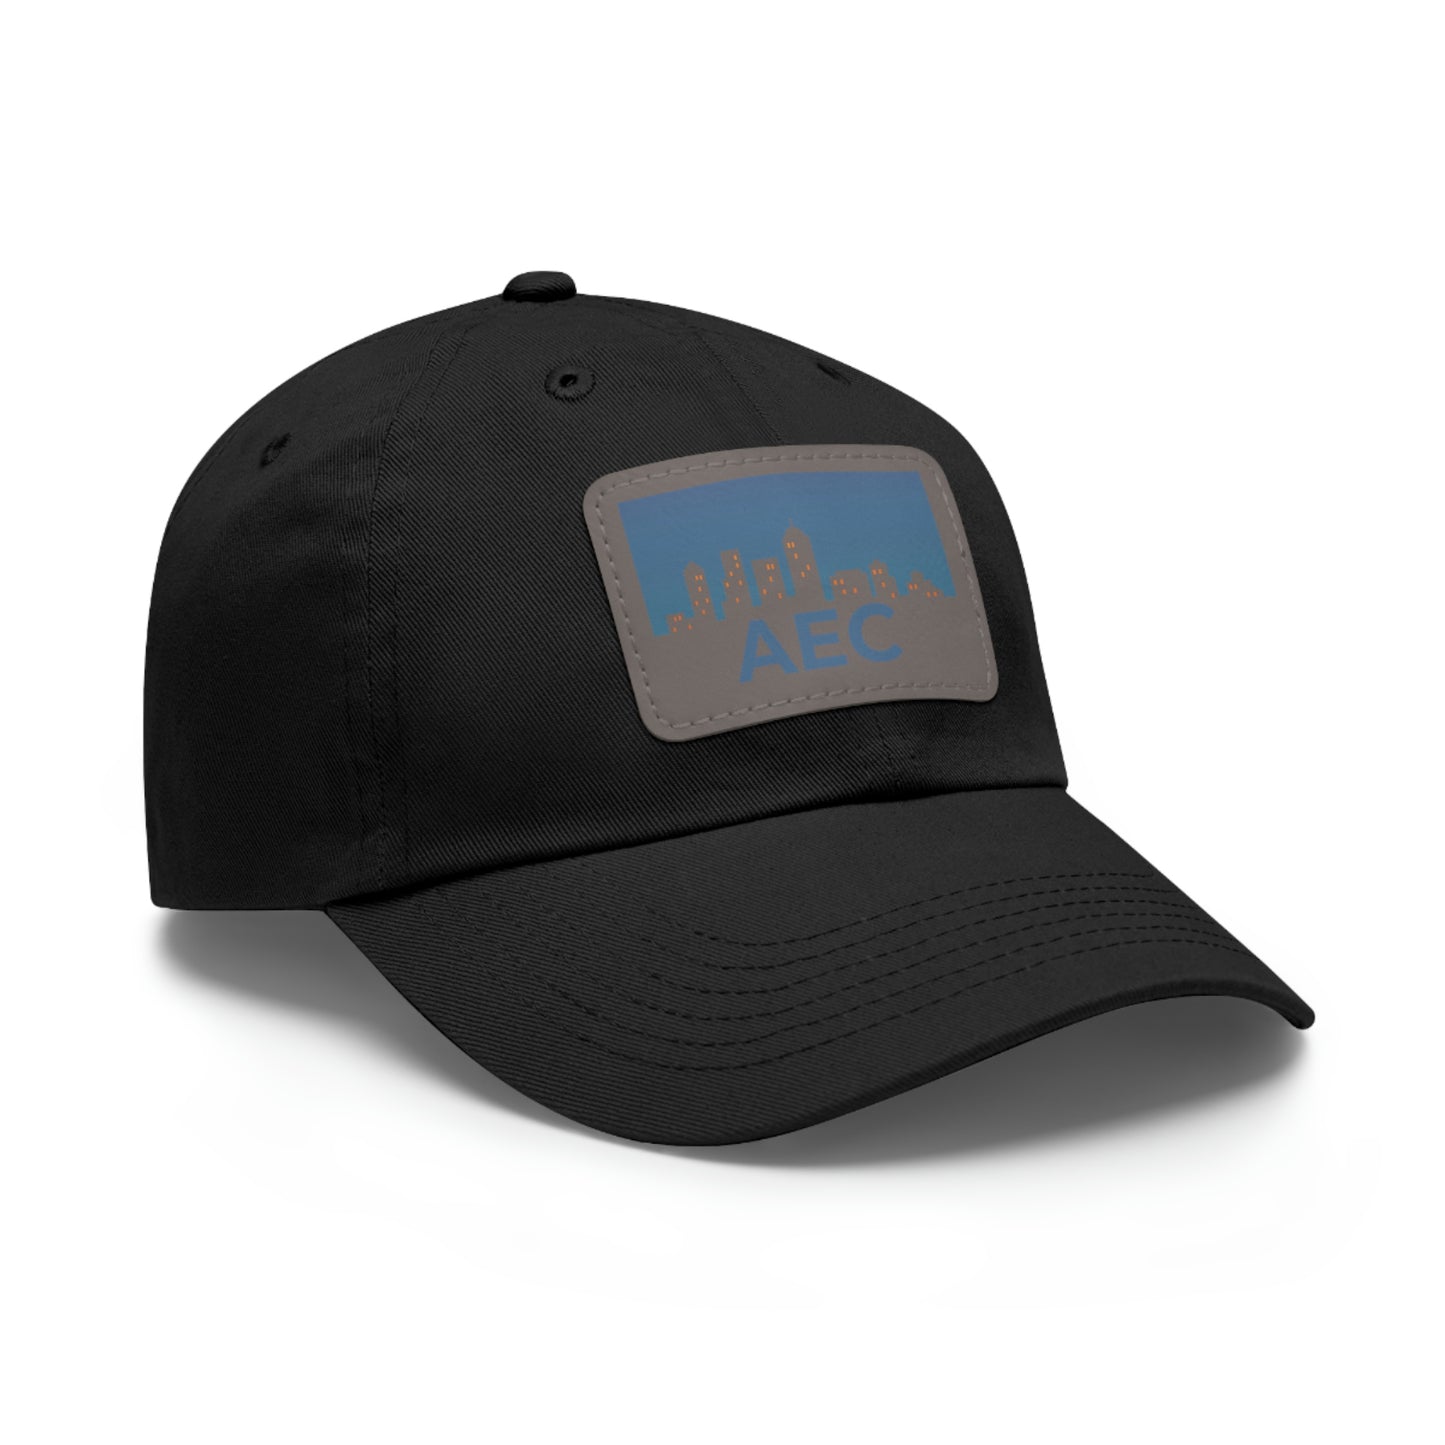 AEC Leather Patch Hat